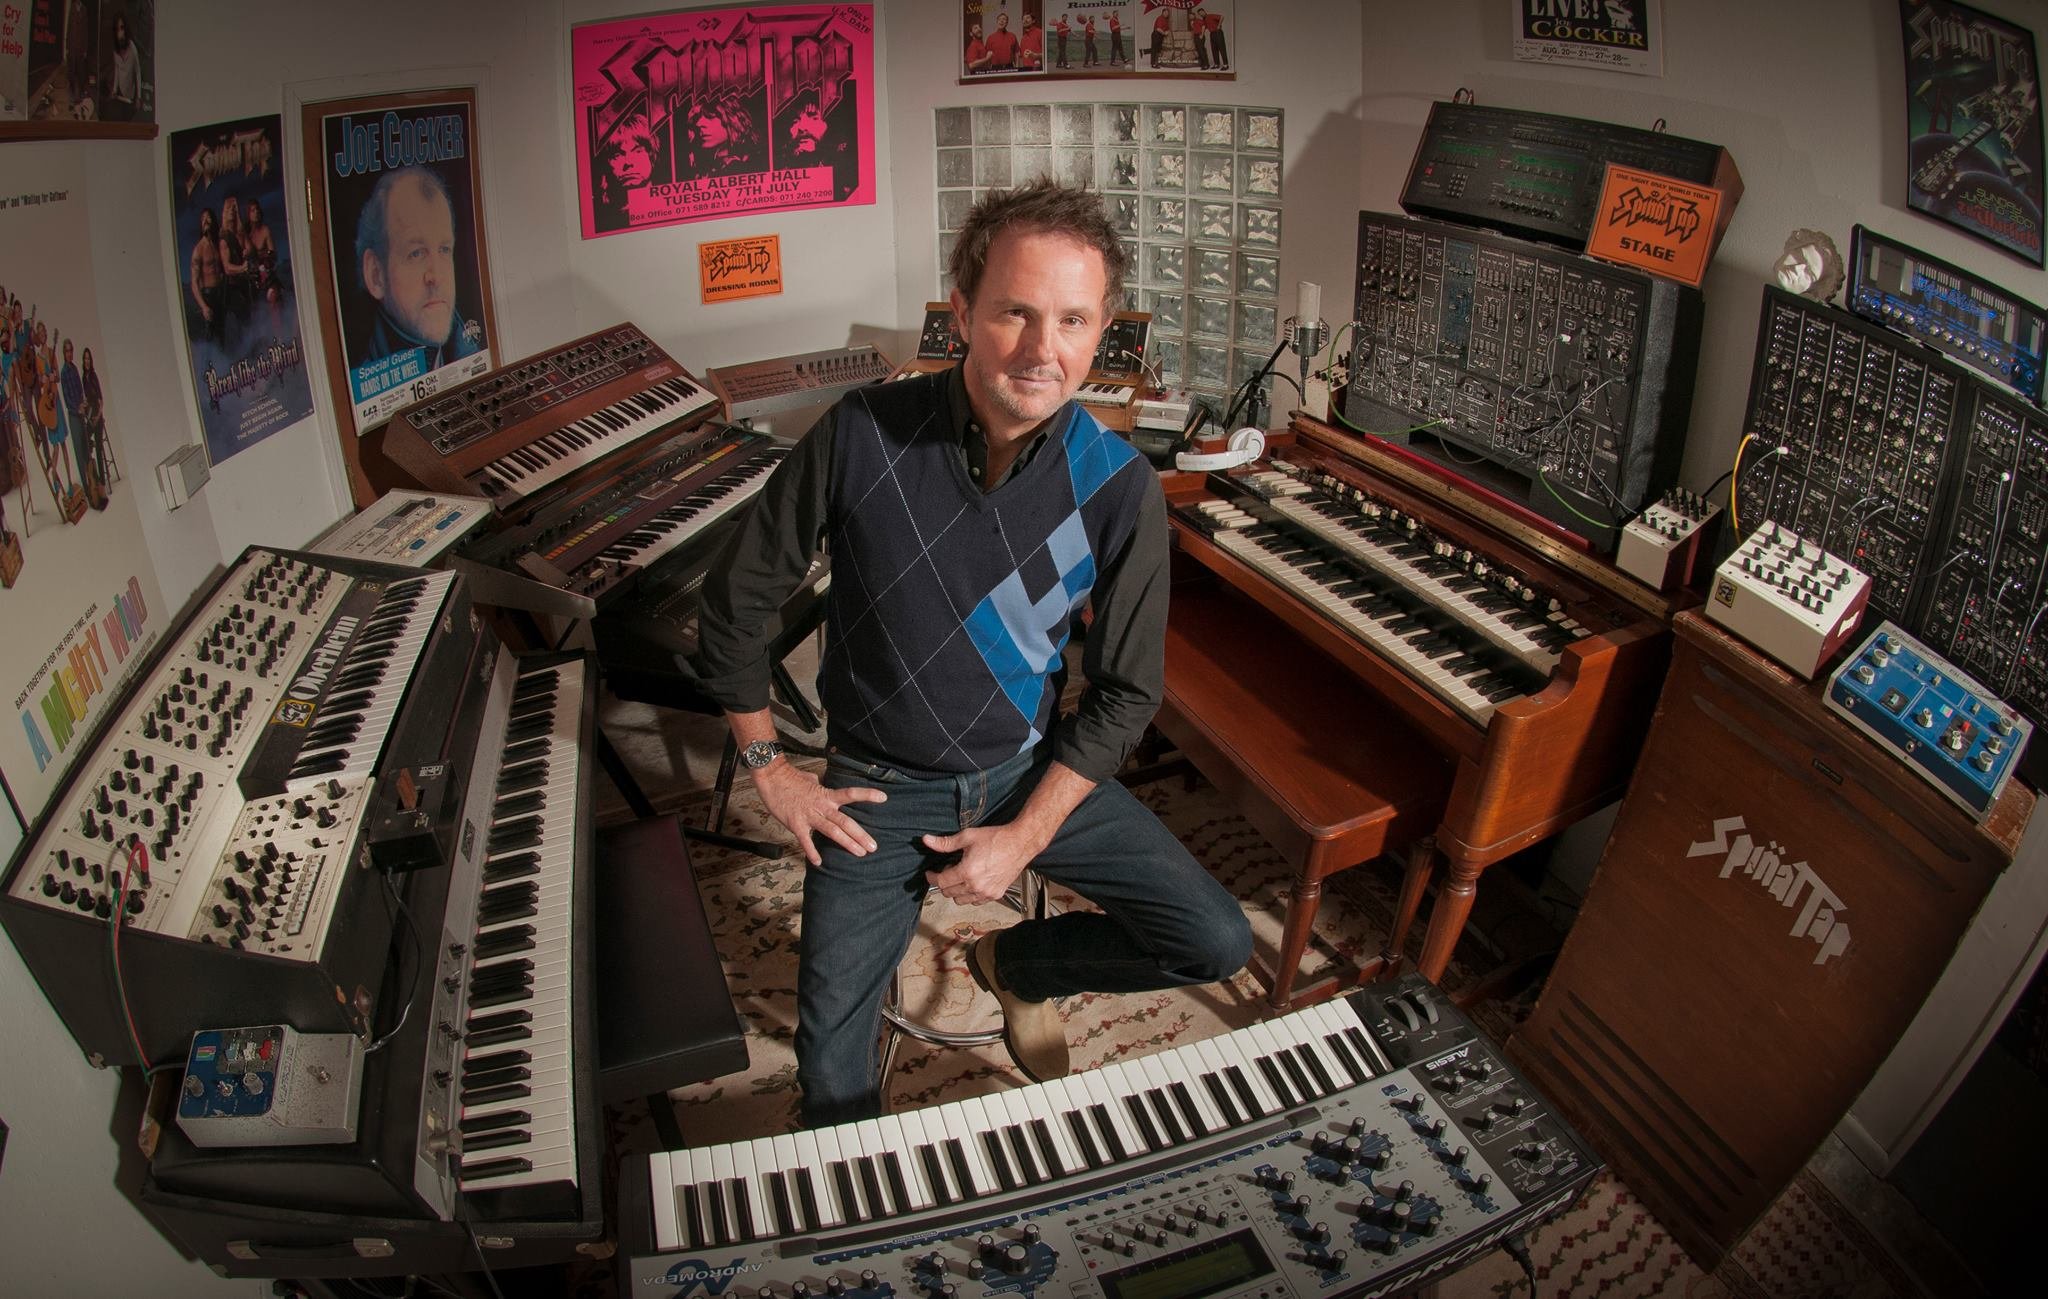 CJ Vanston - American film composer, record producer, songwriter, and keyboardist